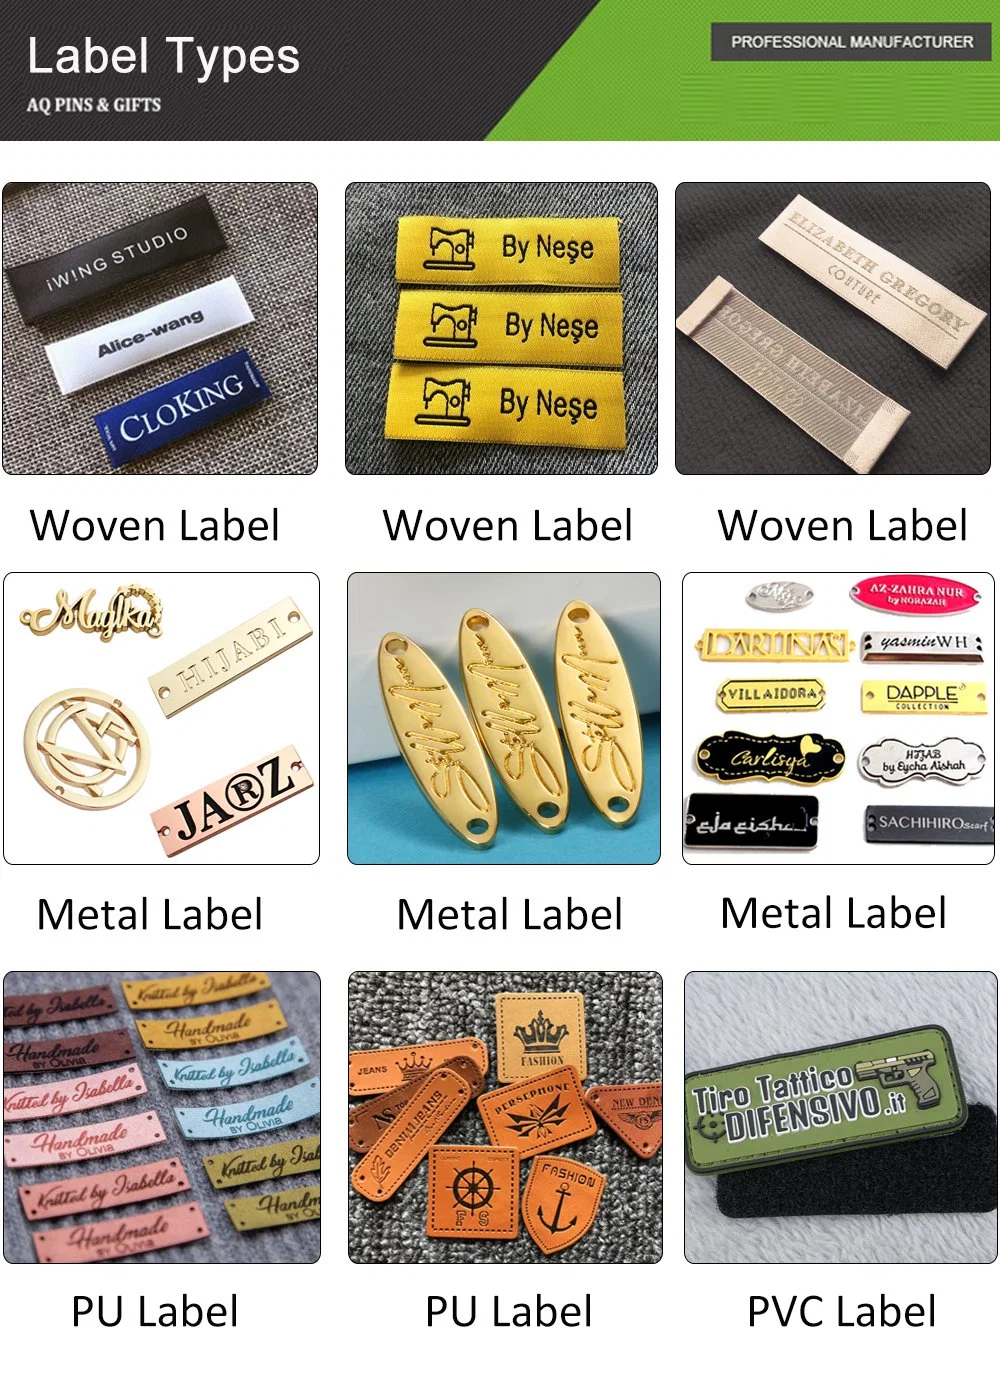 Wholesale Factory Price Custom High Quality Religious Crafts Souvenir Engrave Metal Name Tag Accessories in China